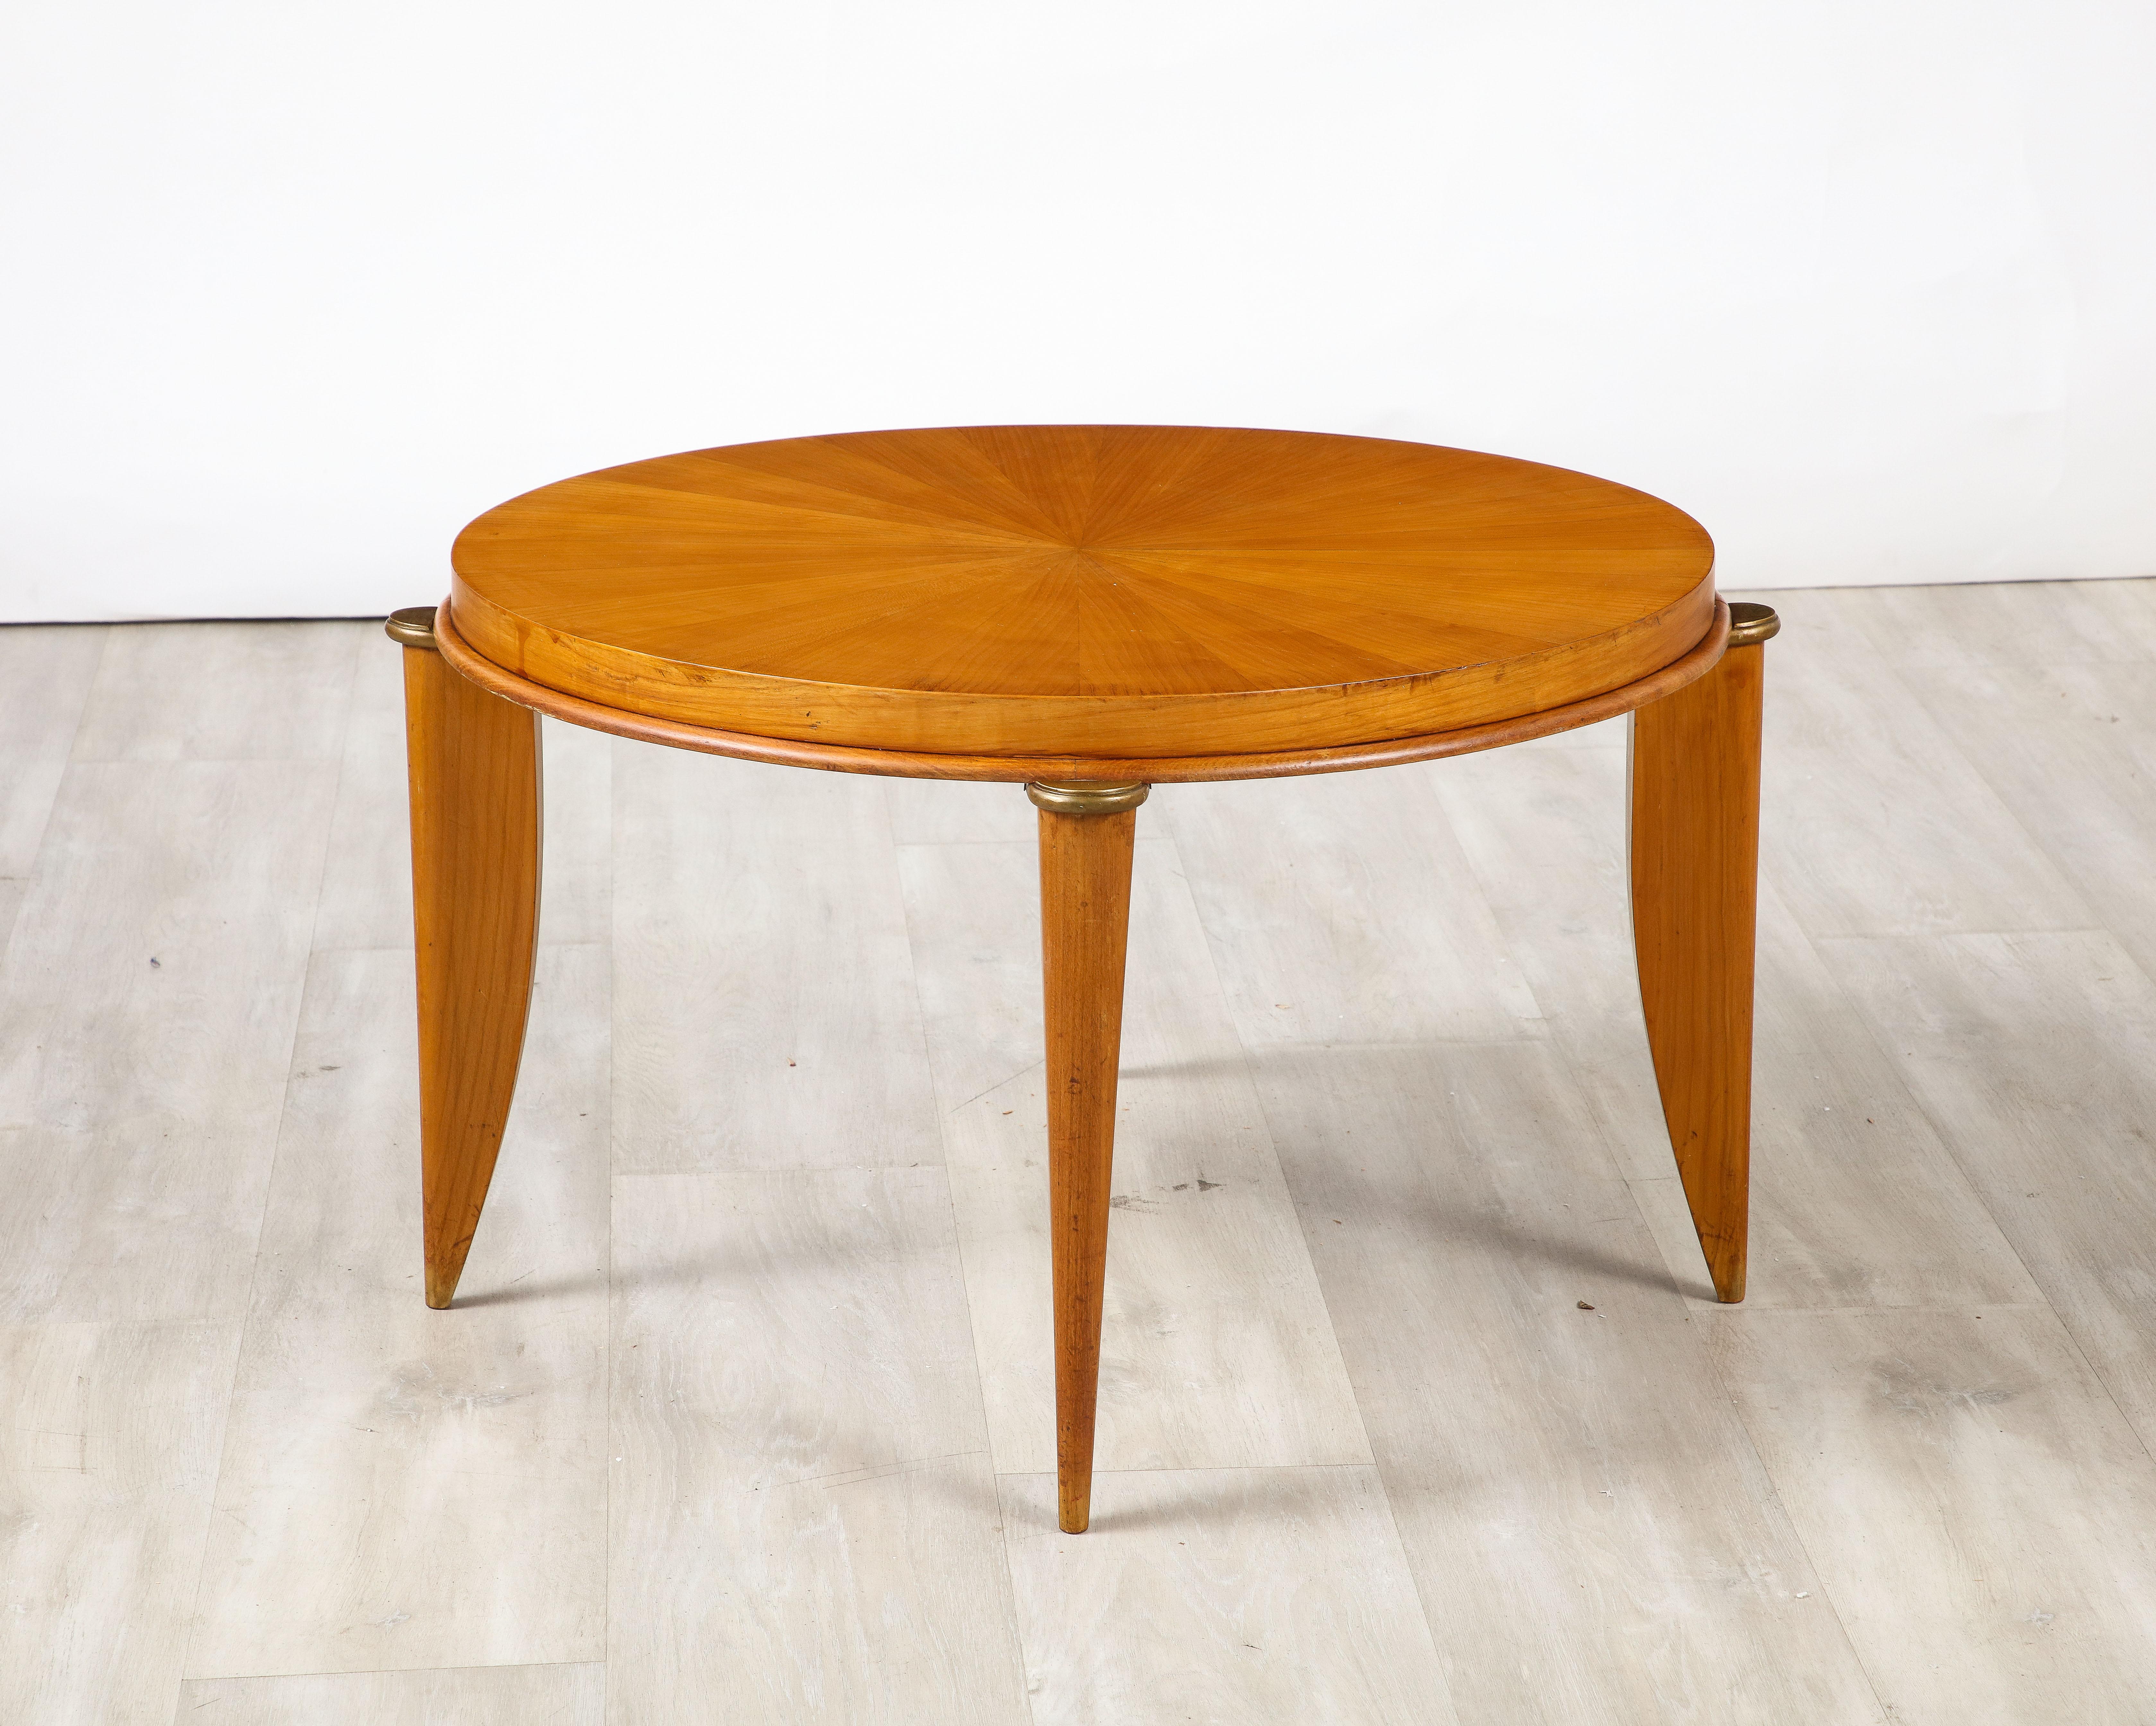 An elegant French Art Deco side table or cocktail table, designed by Maurice Jallot ( 1900 -1971 ), circa 1940. The table is realized in sycamore maple and of very solid construction, the circular top is supported by very stylish splayed and tapered